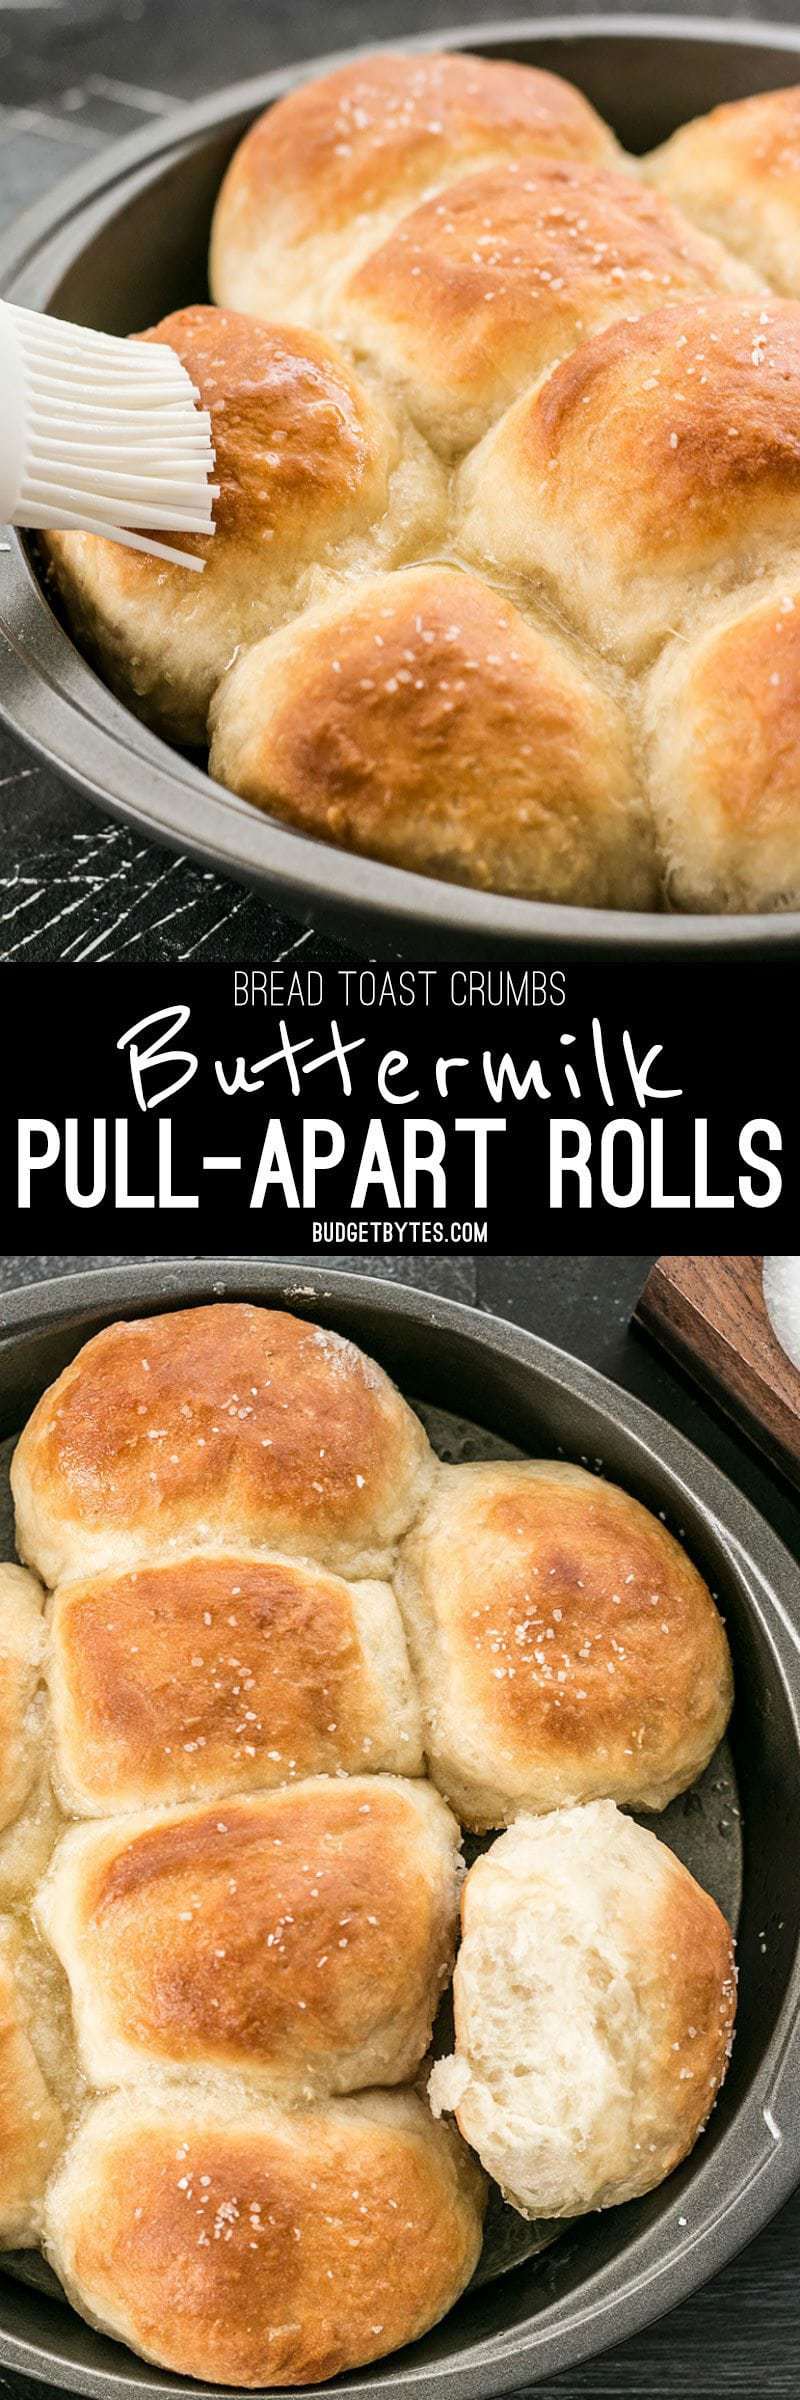 These incredible light and delicate Buttermilk Pull-Apart Rolls couldn't be easier thanks to a simple no-knead dough. BudgetBytes.com